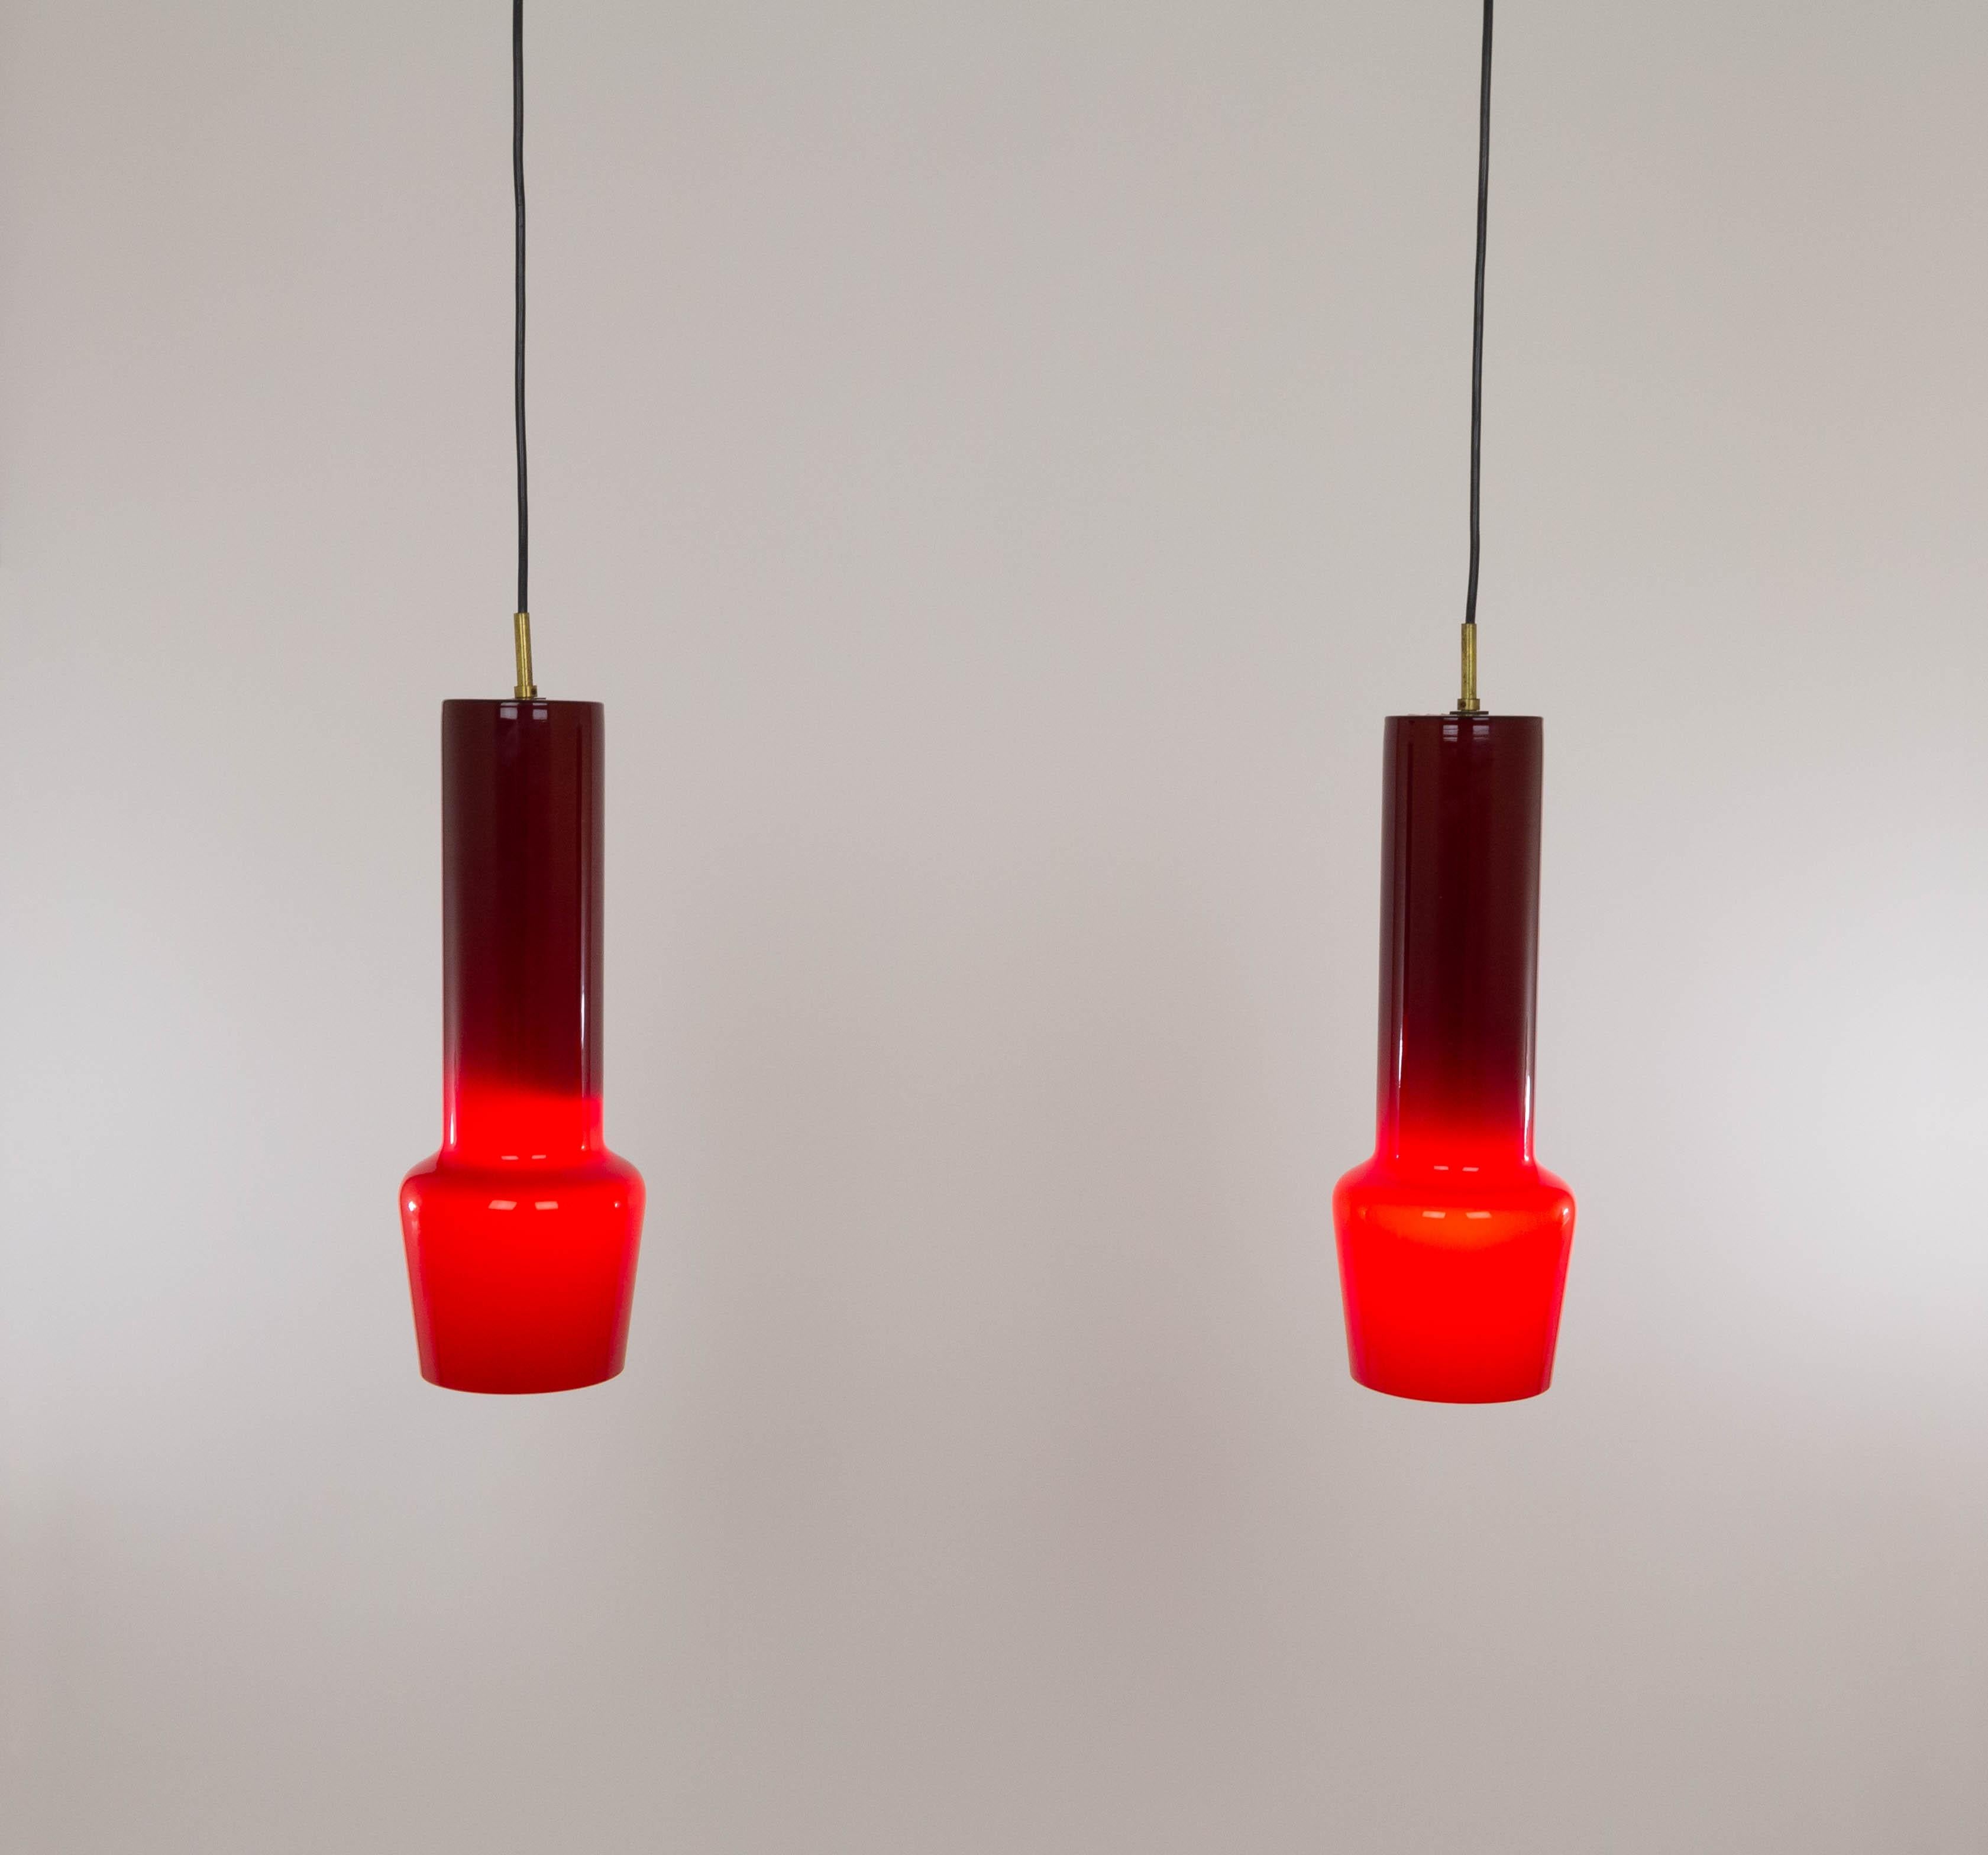 A pair of hand-blown red no. 011.11 glass pendants designed by Massimo Vignelli at the start of his impressive career in design and executed by Murano glass specialist Venini. One of the most characteristic lamps that Vignelli designed for